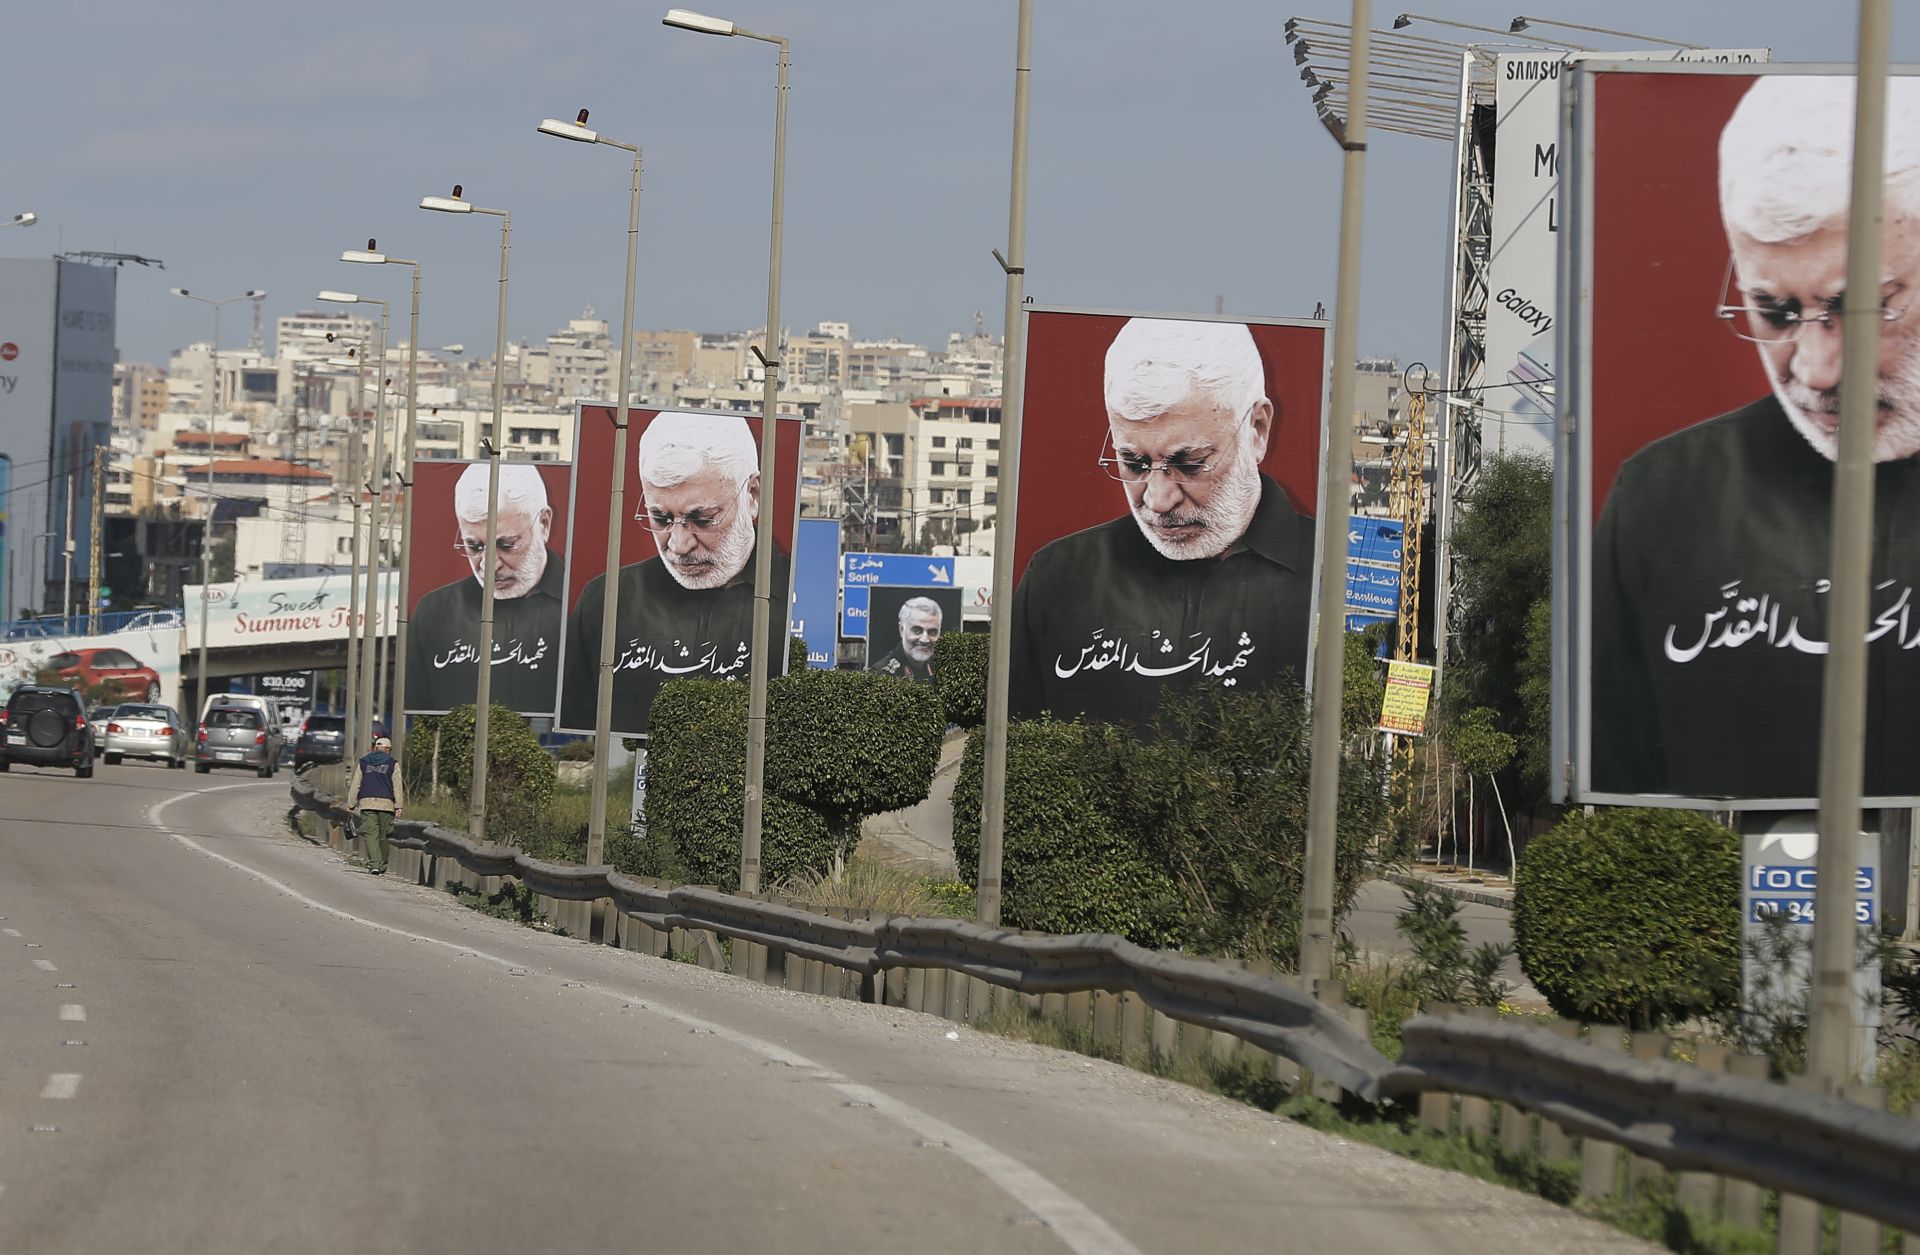 A picture taken on Jan. 11, 2020, shows portraits of Iraq's slain Popular Mobilization Unit deputy chief Abu Mahdi al-Muhandis, the late founder of Kataib Hezbollah, on the southern exit of the Lebanese capital Beirut.